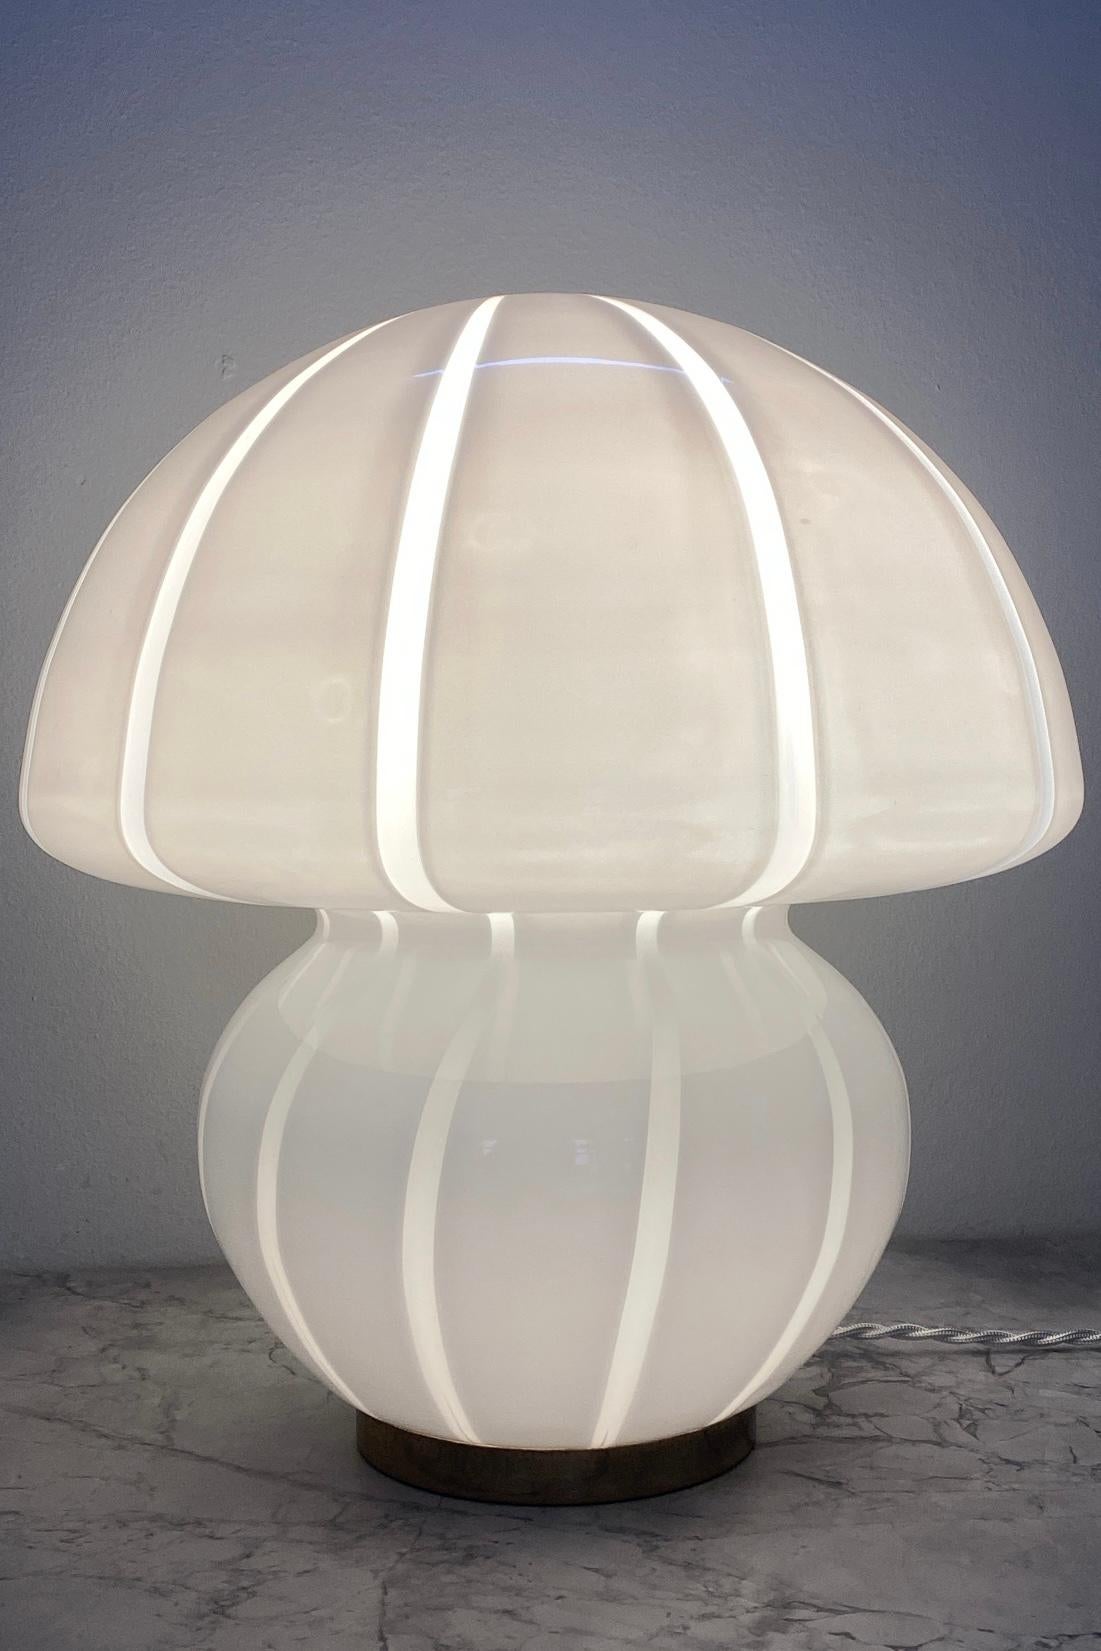 Extra large vintage Murano champignon mushroom lamp. Mouth blown in white opaline glass. Handmade in Italy, 1970s, and comes with new white cord. 

H:38 cm D:34 cm